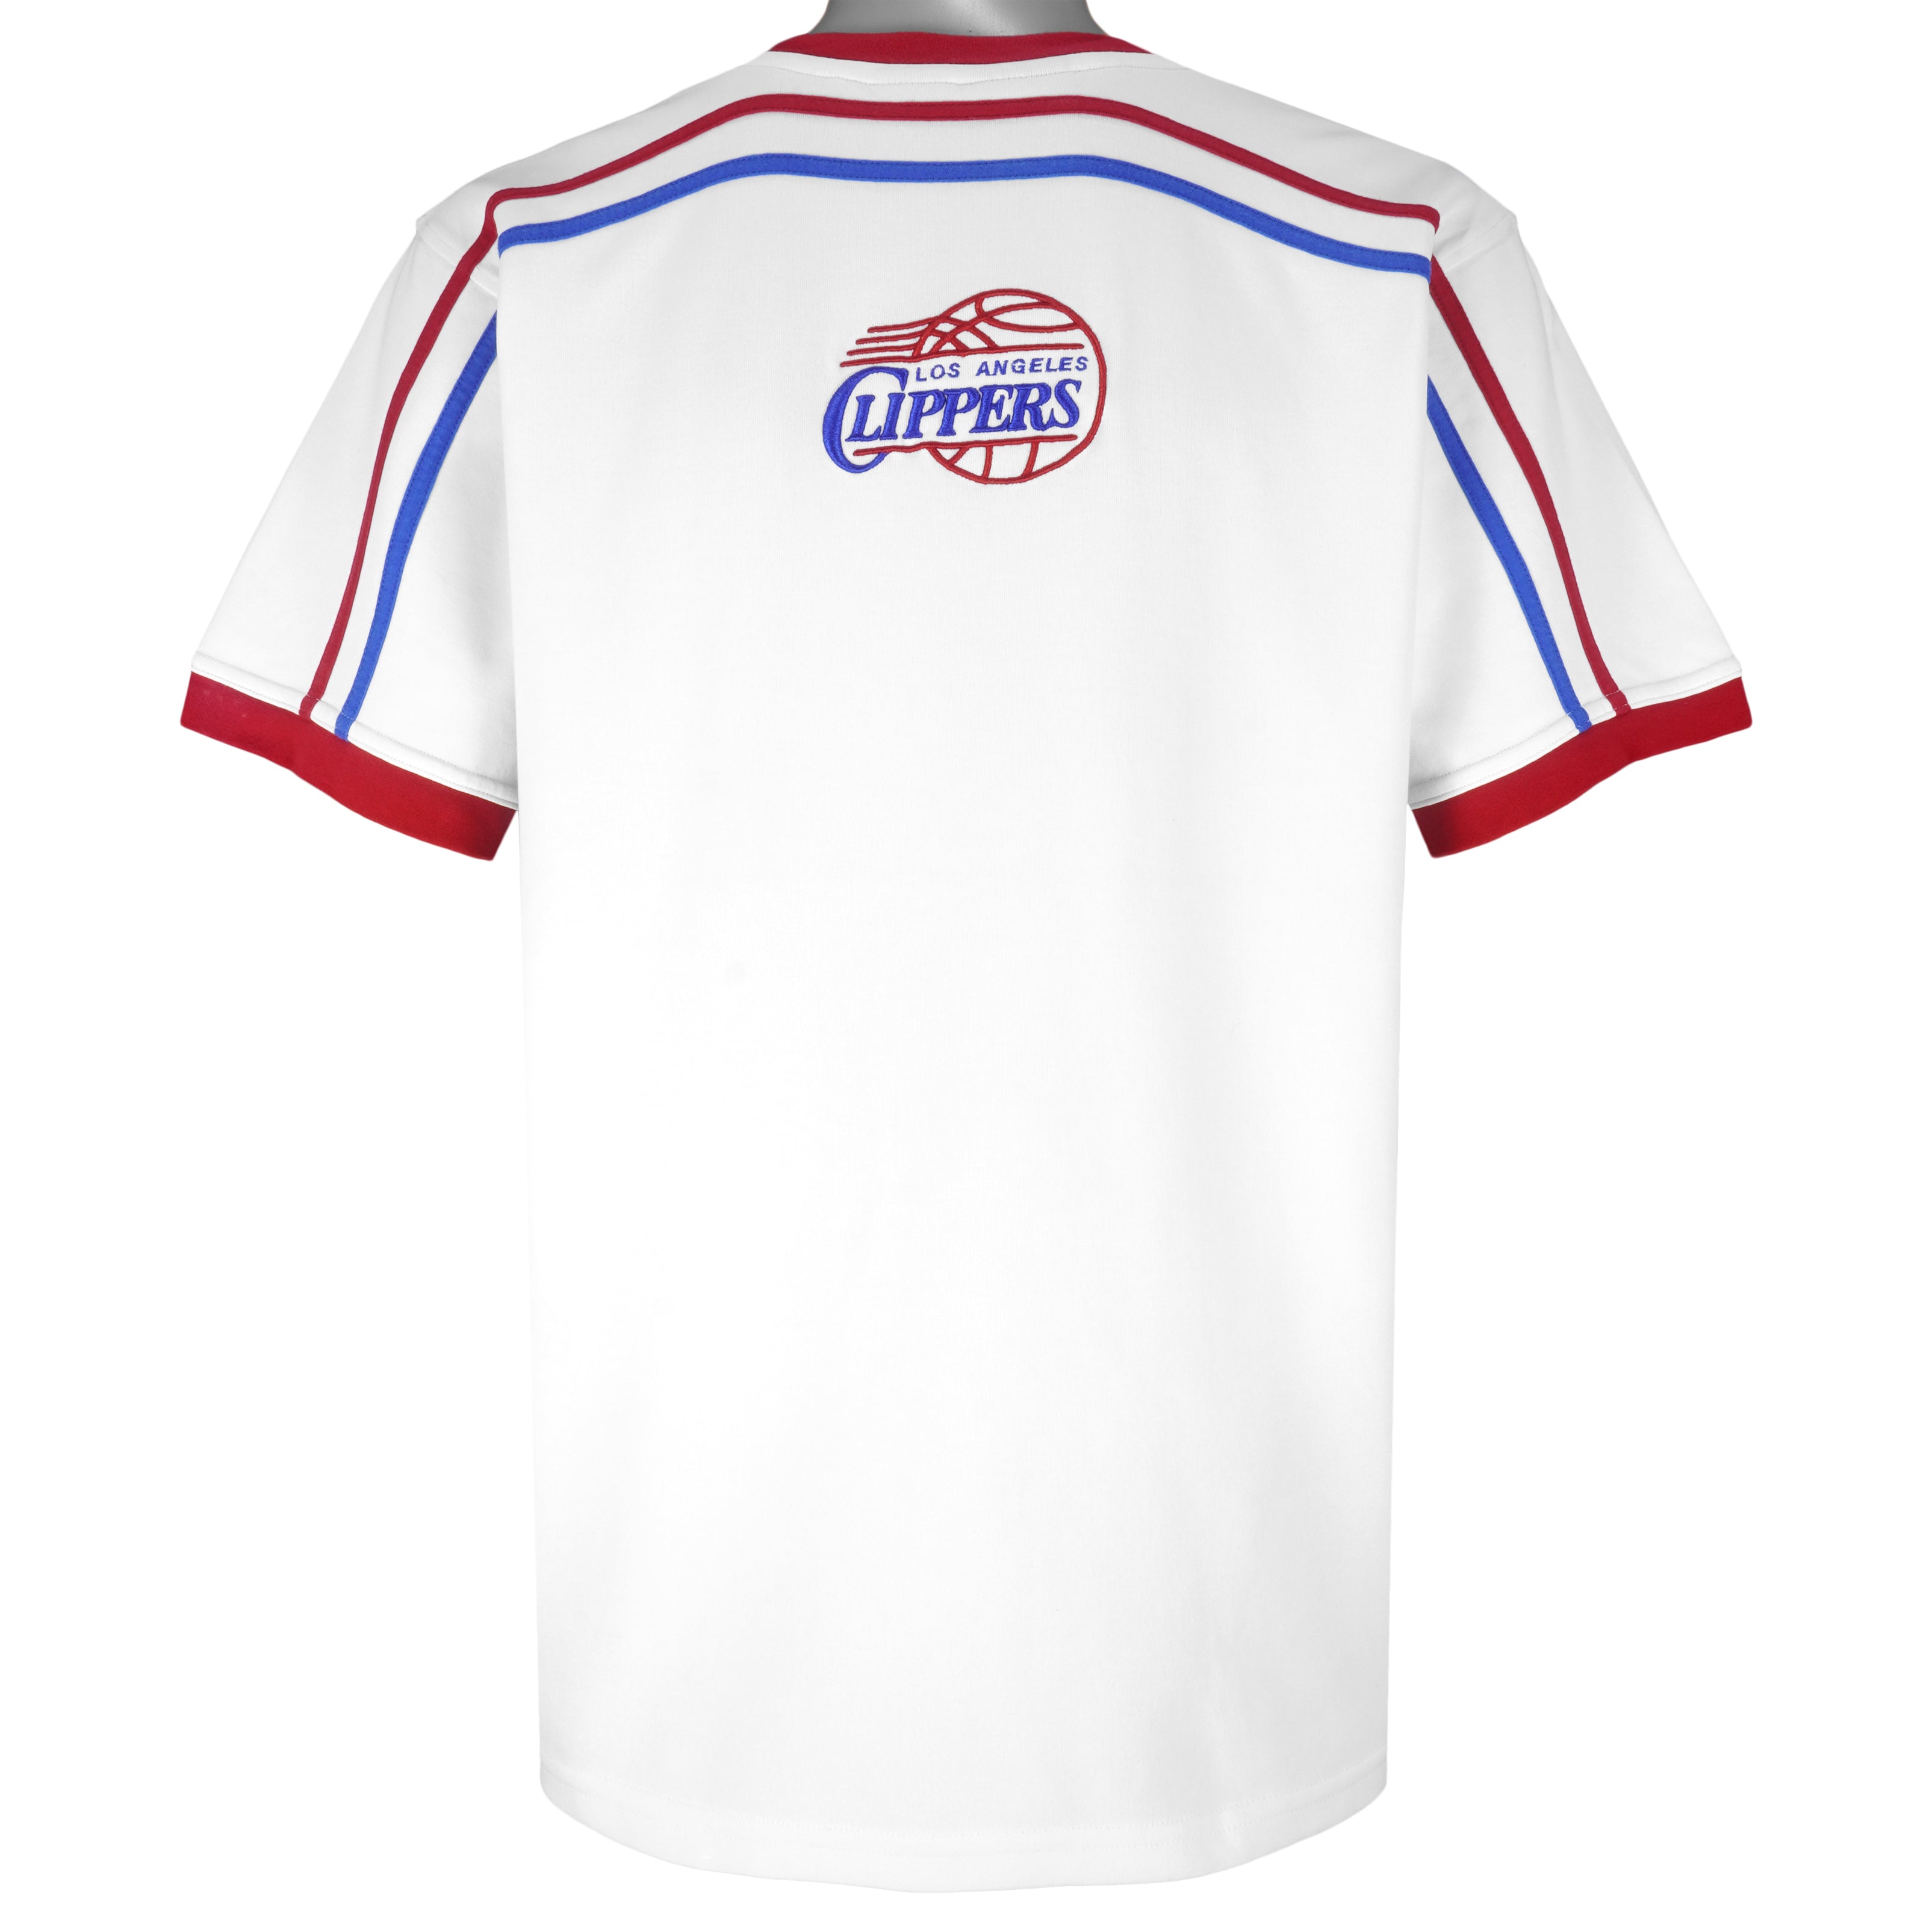 angeles clippers throwback jersey